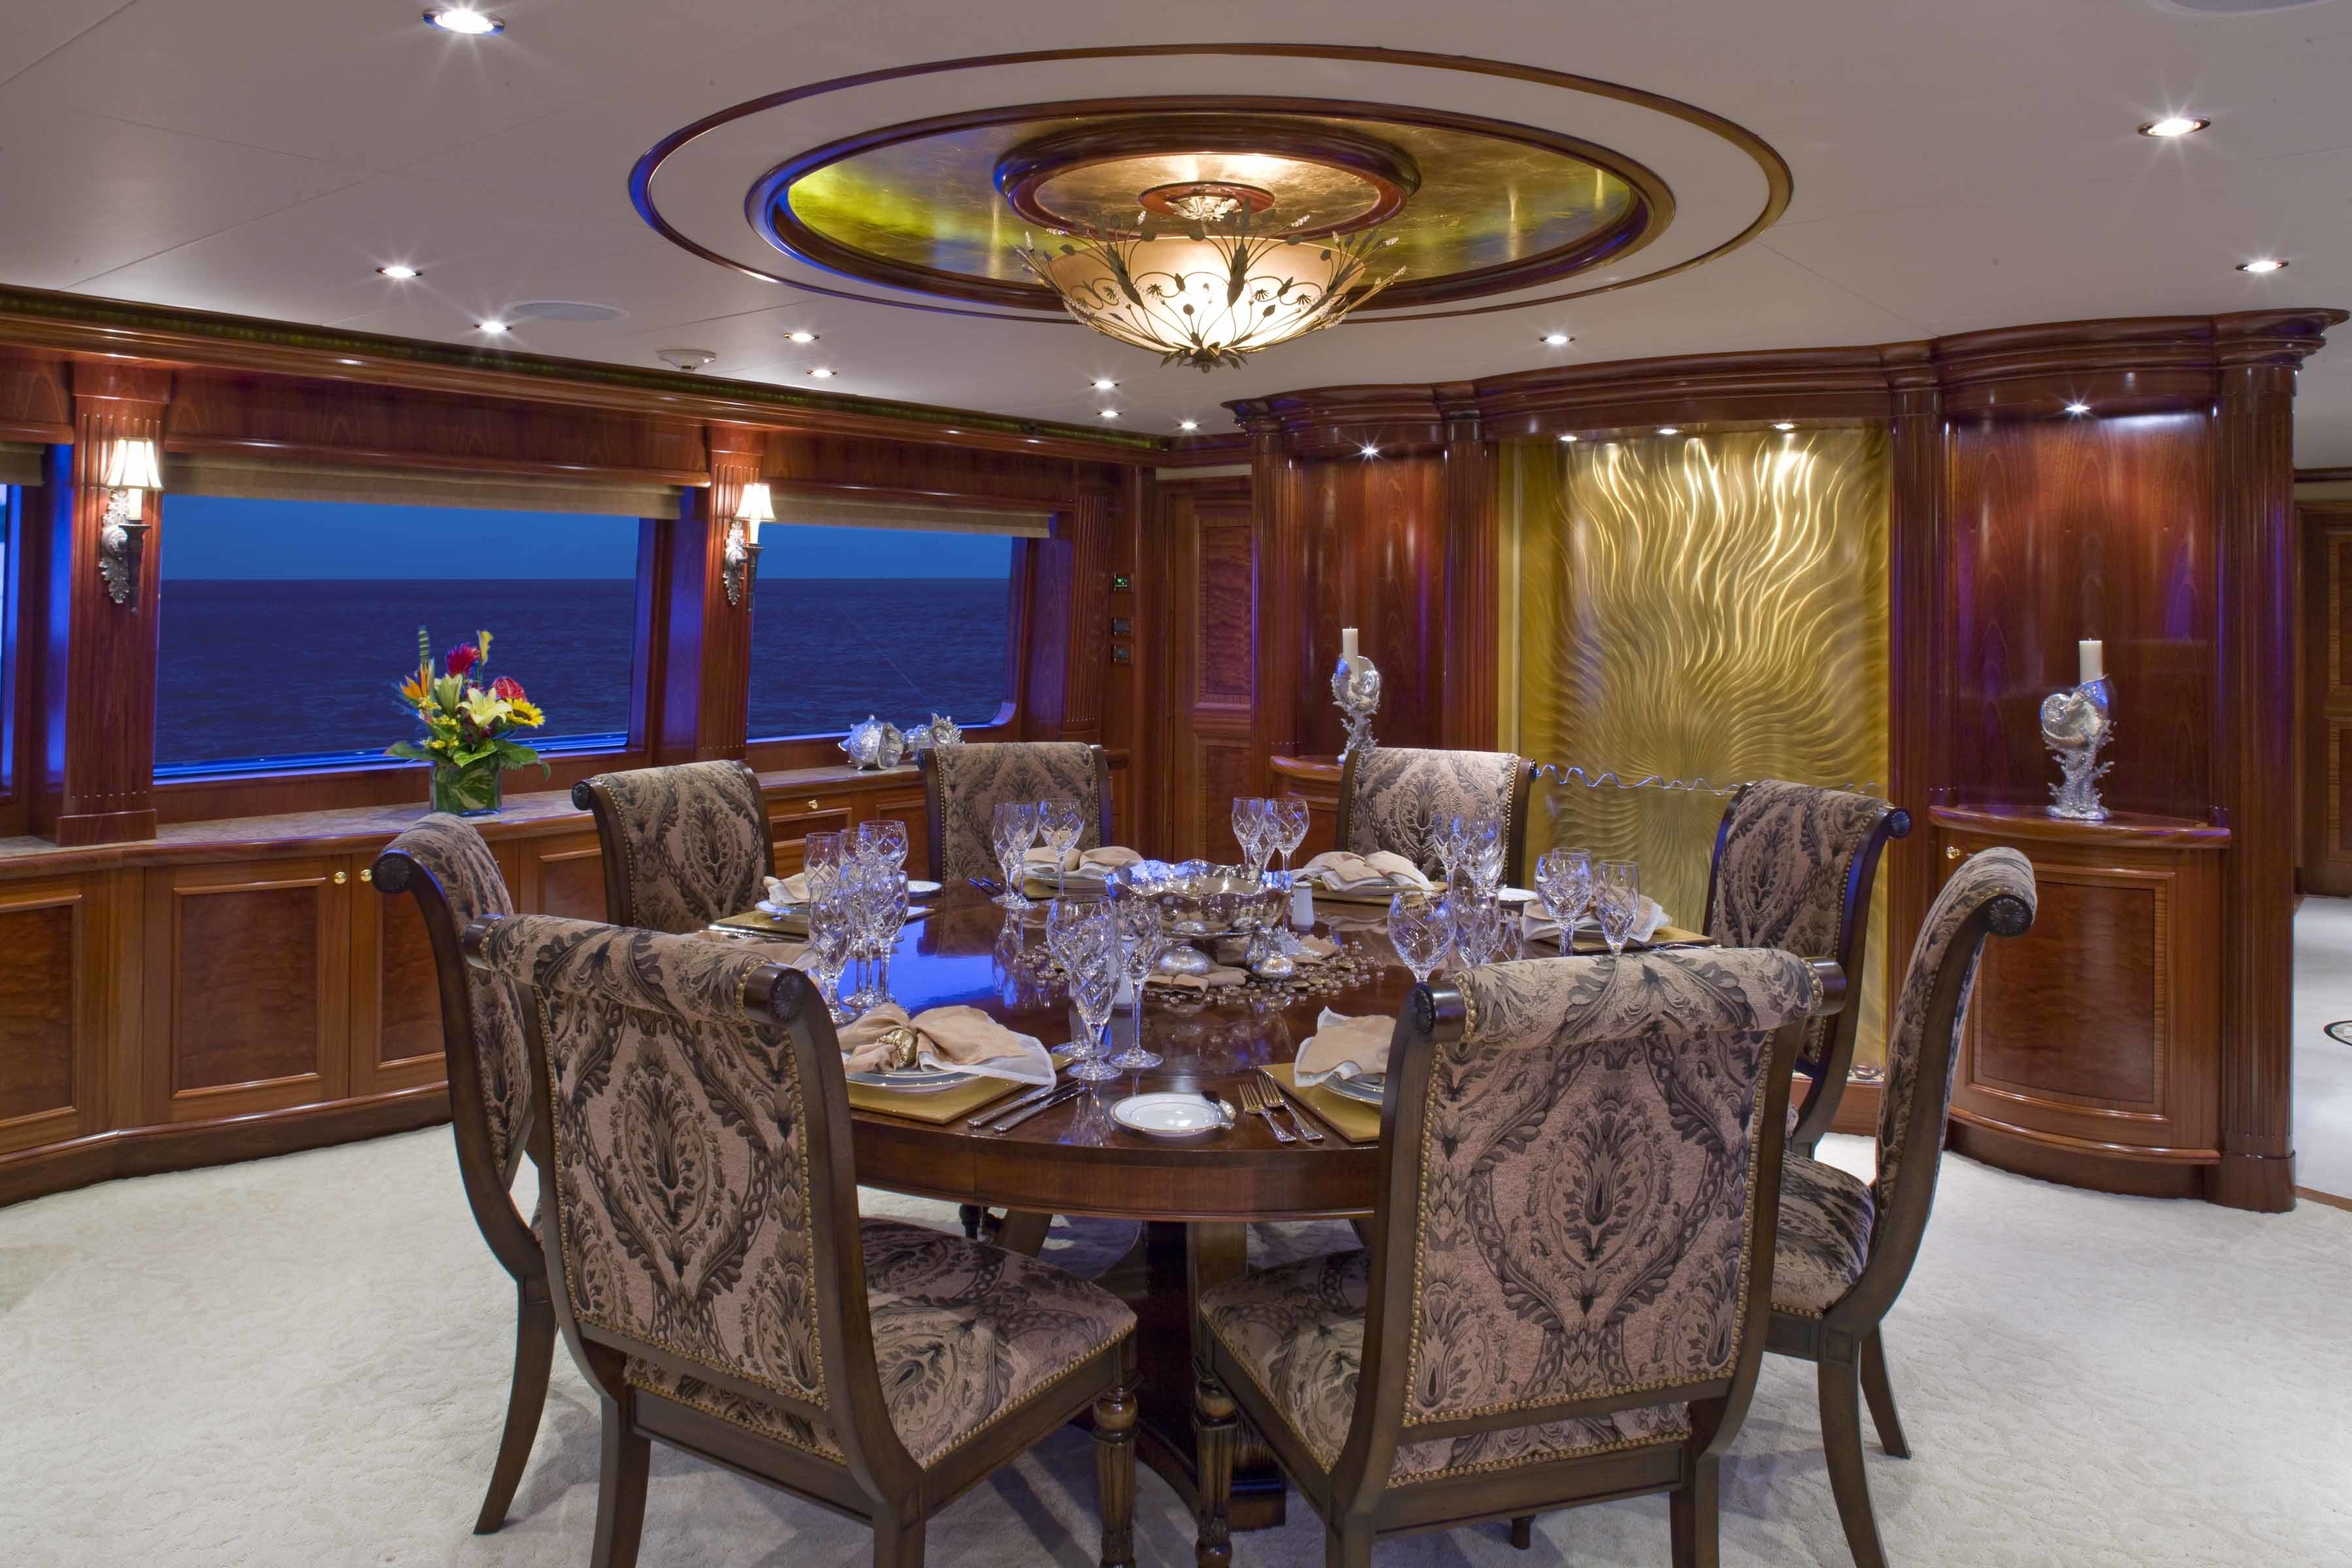 Eating/dining Area On Board Yacht FAR FROM IT